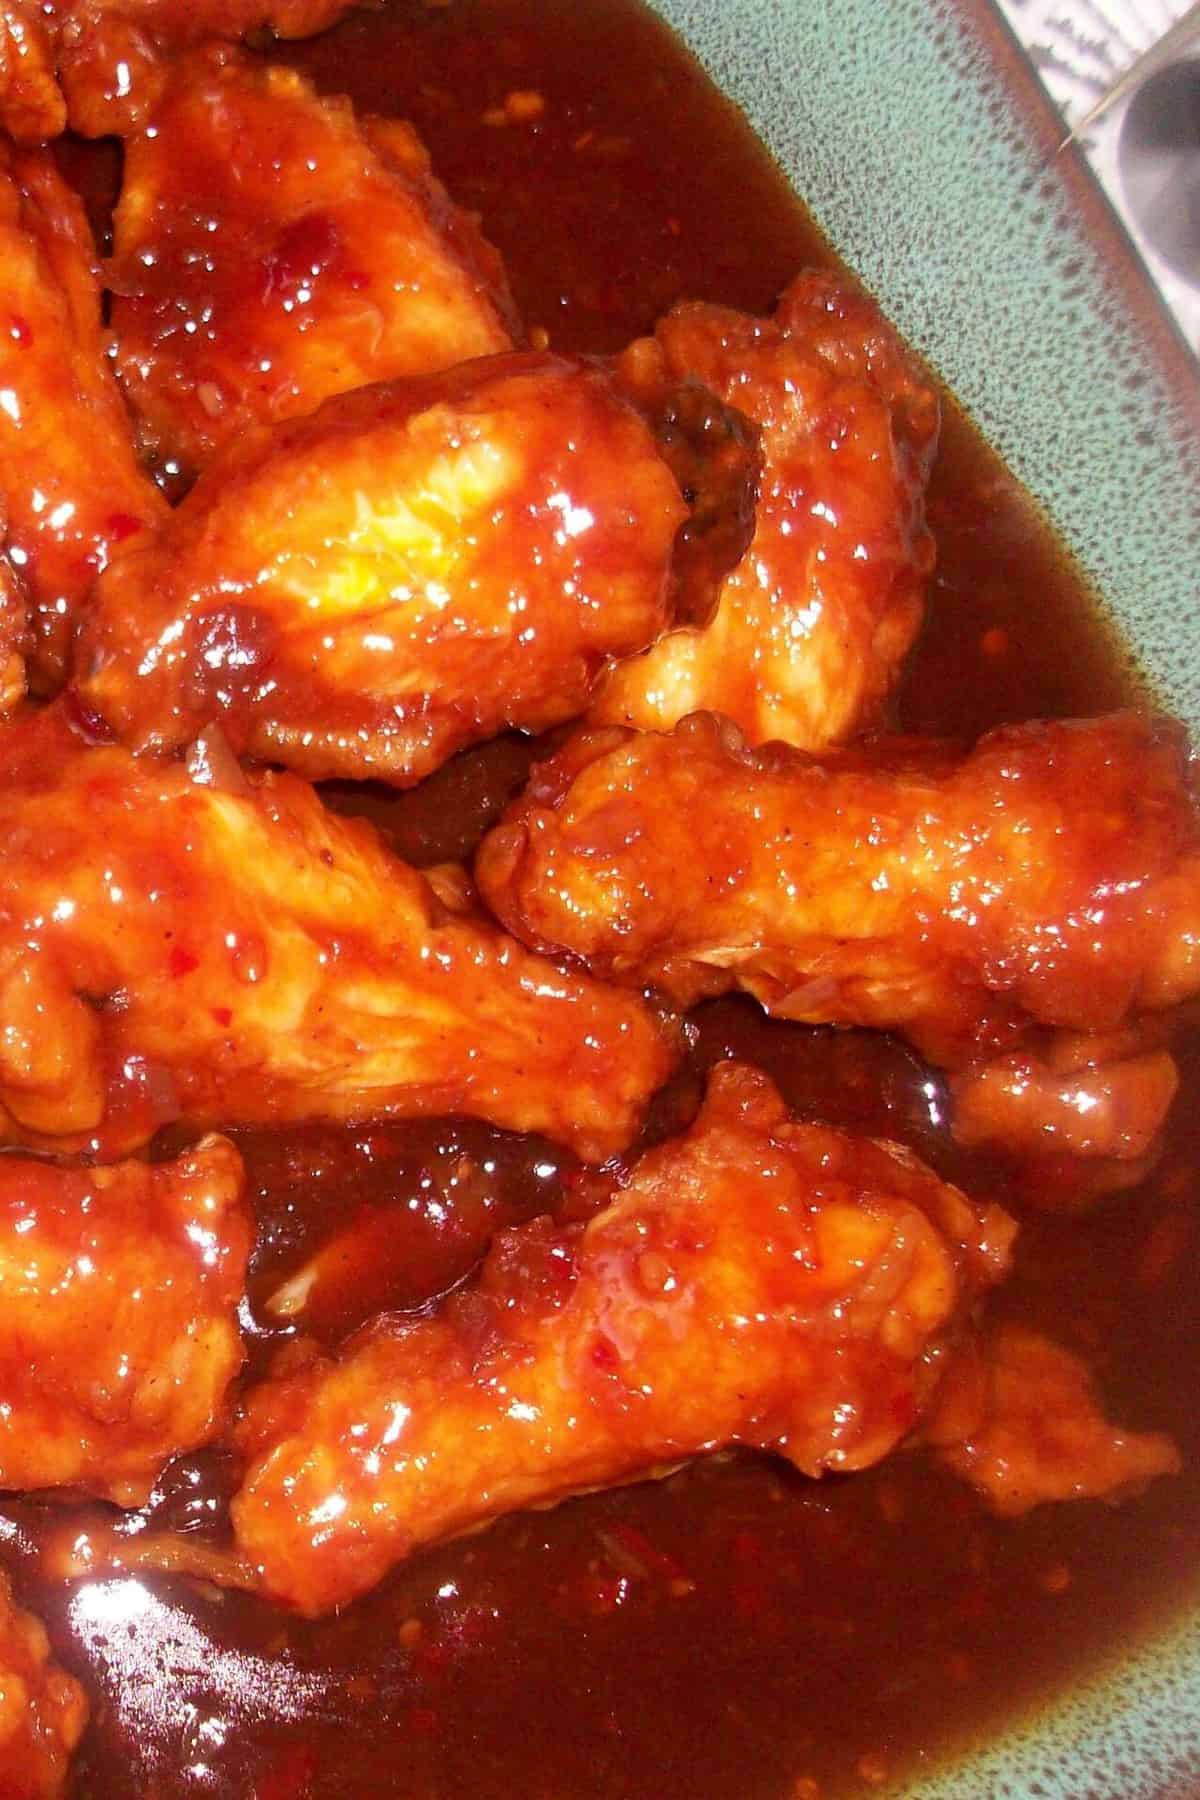  Your taste buds will thank you for indulging in these flavorsome wings.